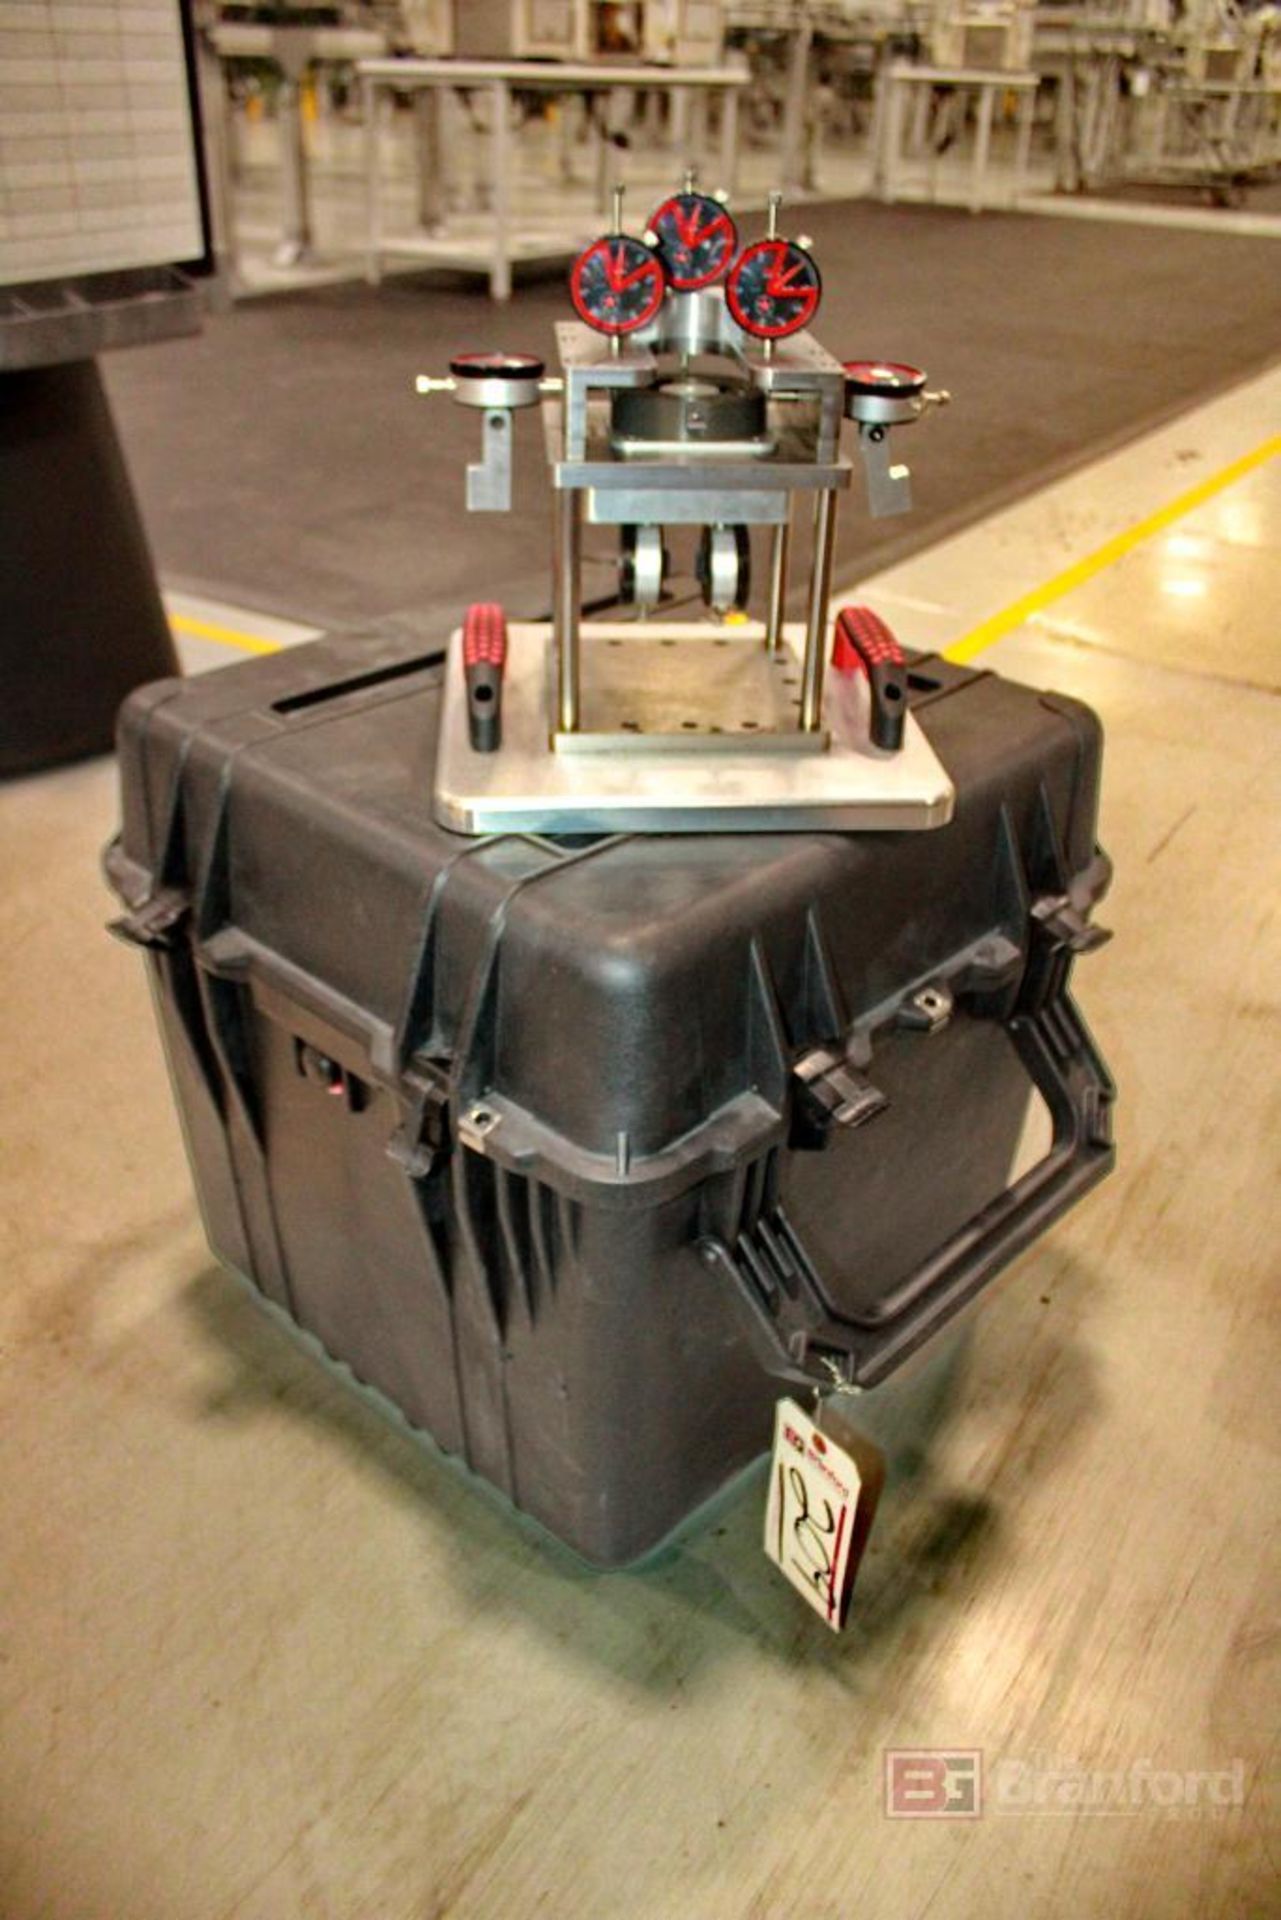 MHC Industrial Supply Laser Alignment Assembly Check Fixture w/ Pelican Case - Image 12 of 15